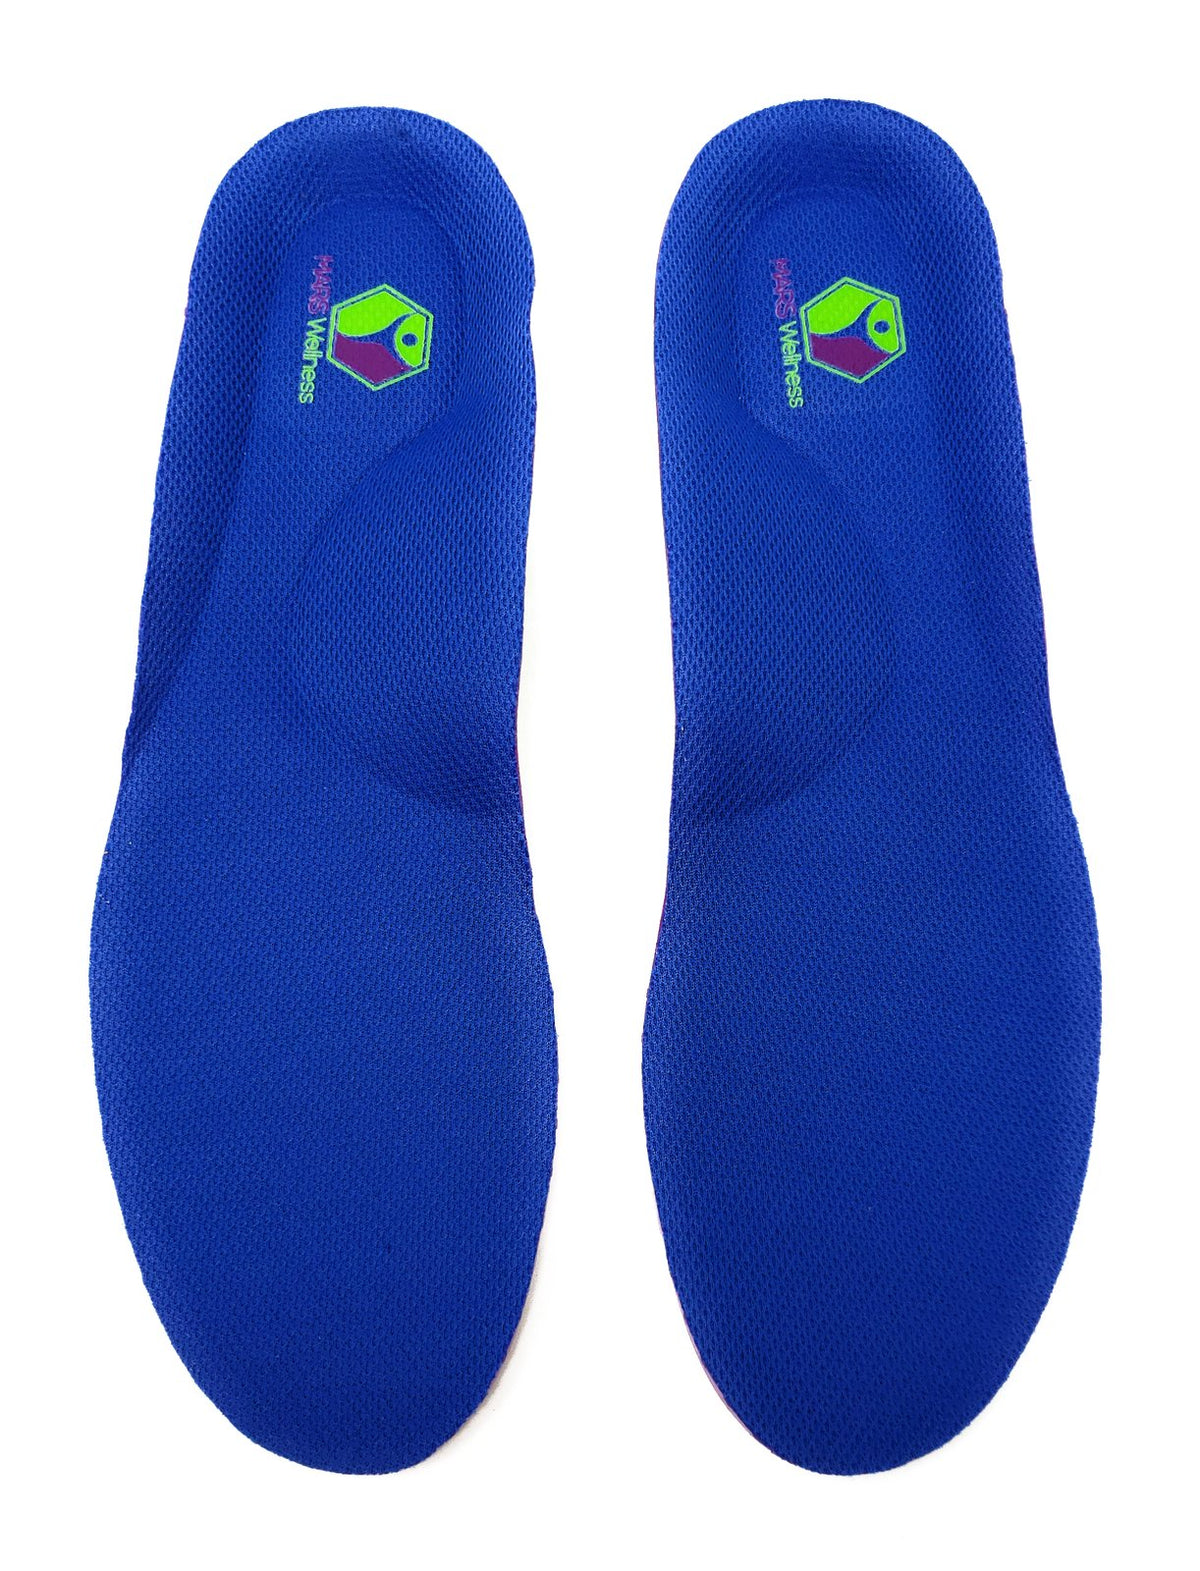 PowerTraq Sport Orthotic - Medical Grade High Arch Support Orthopedic Orthotic Insoles - Plantar Fasciitis, Flat Feet, Foot Pain - Maximum Support - by Mars Wellness